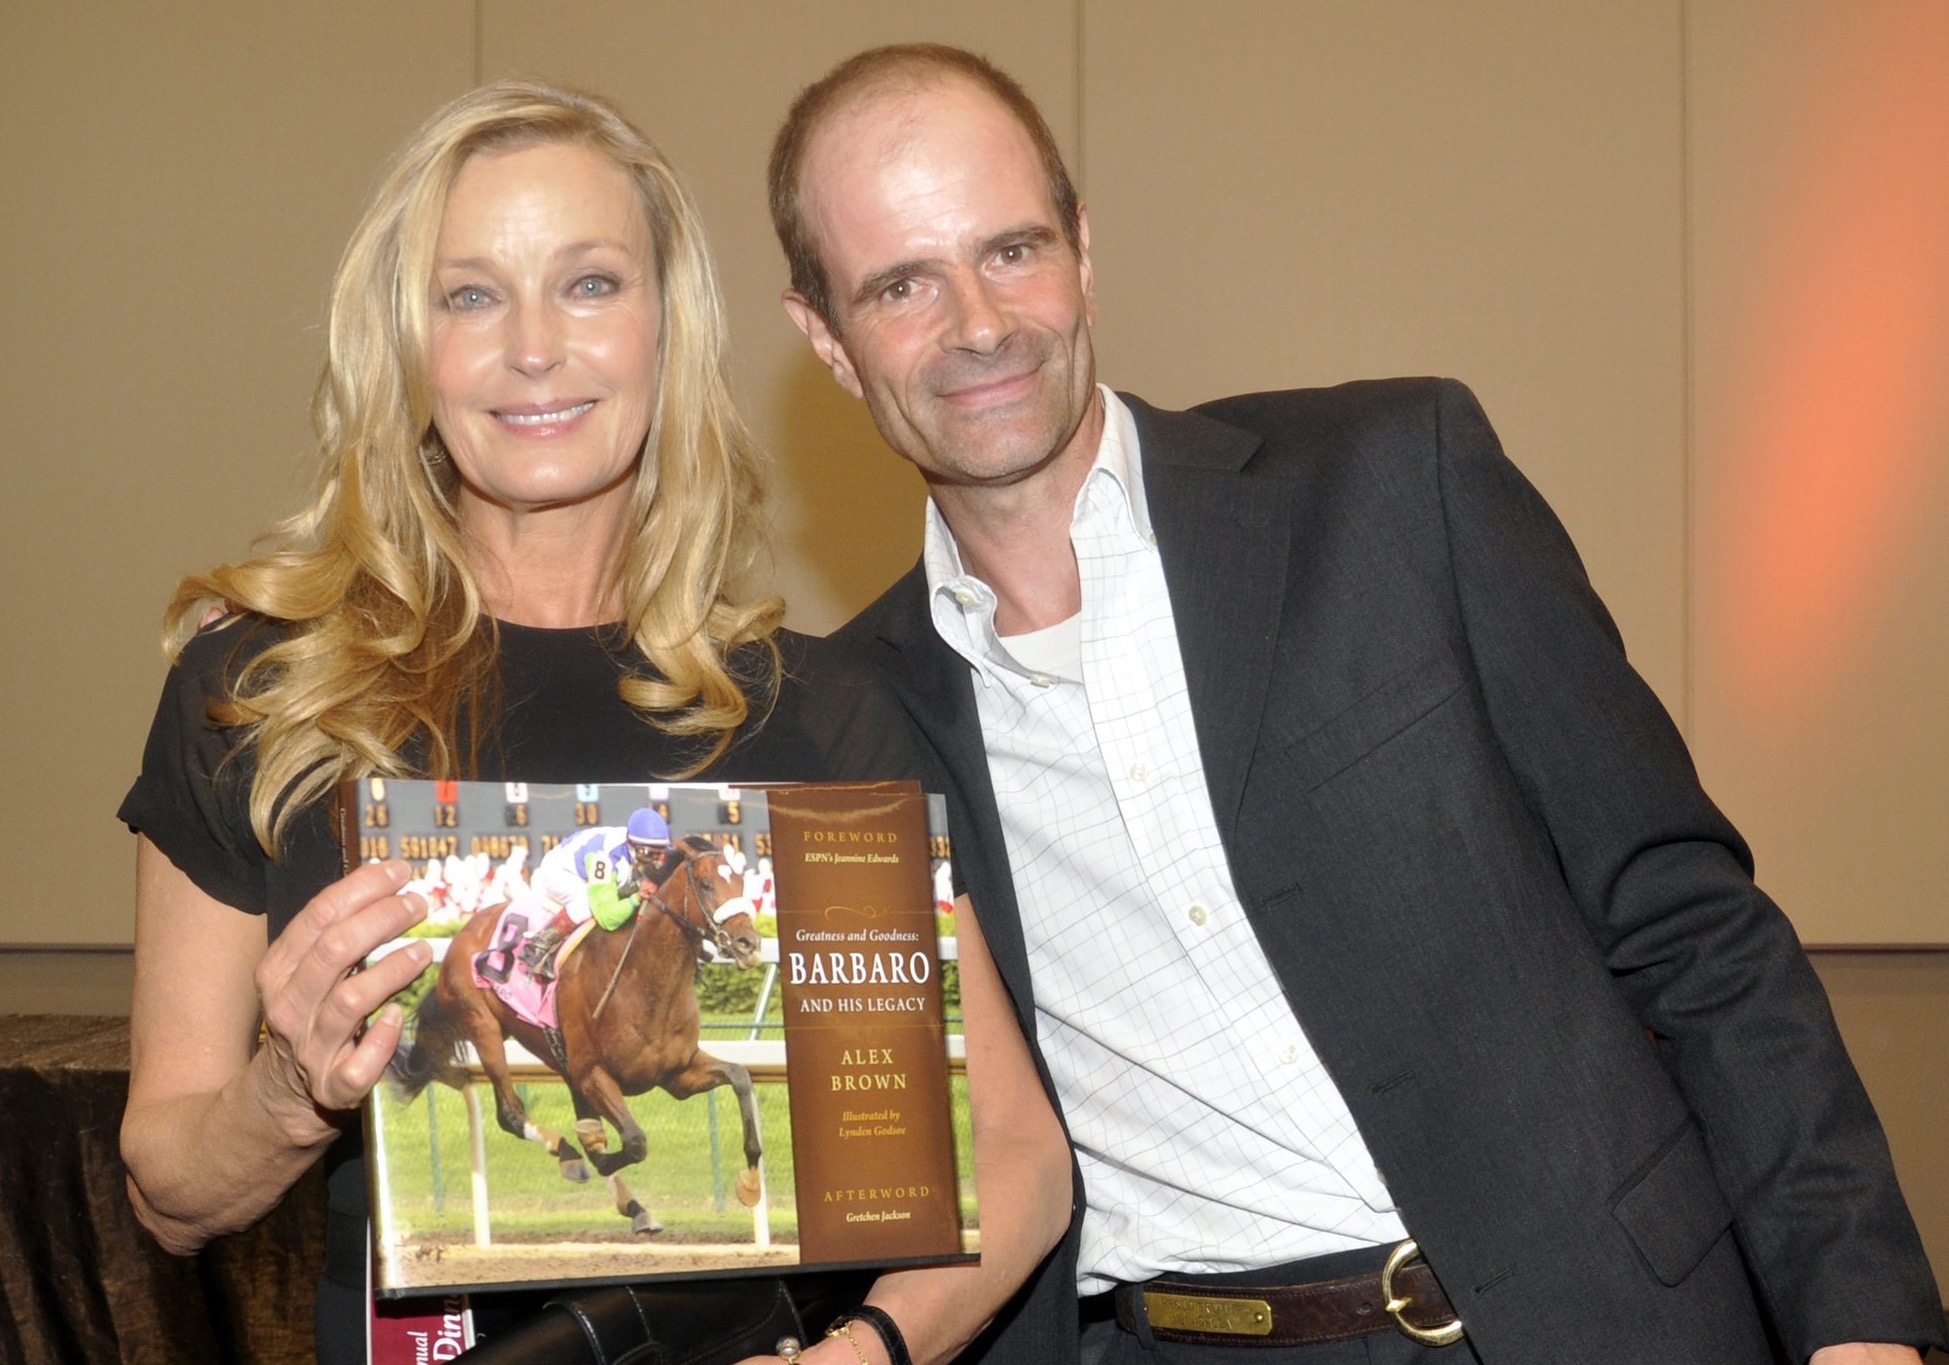 Bo Derek, the actress and former California Horse Racing Board member, with Alex Brown at the launch of his book on Barbaro